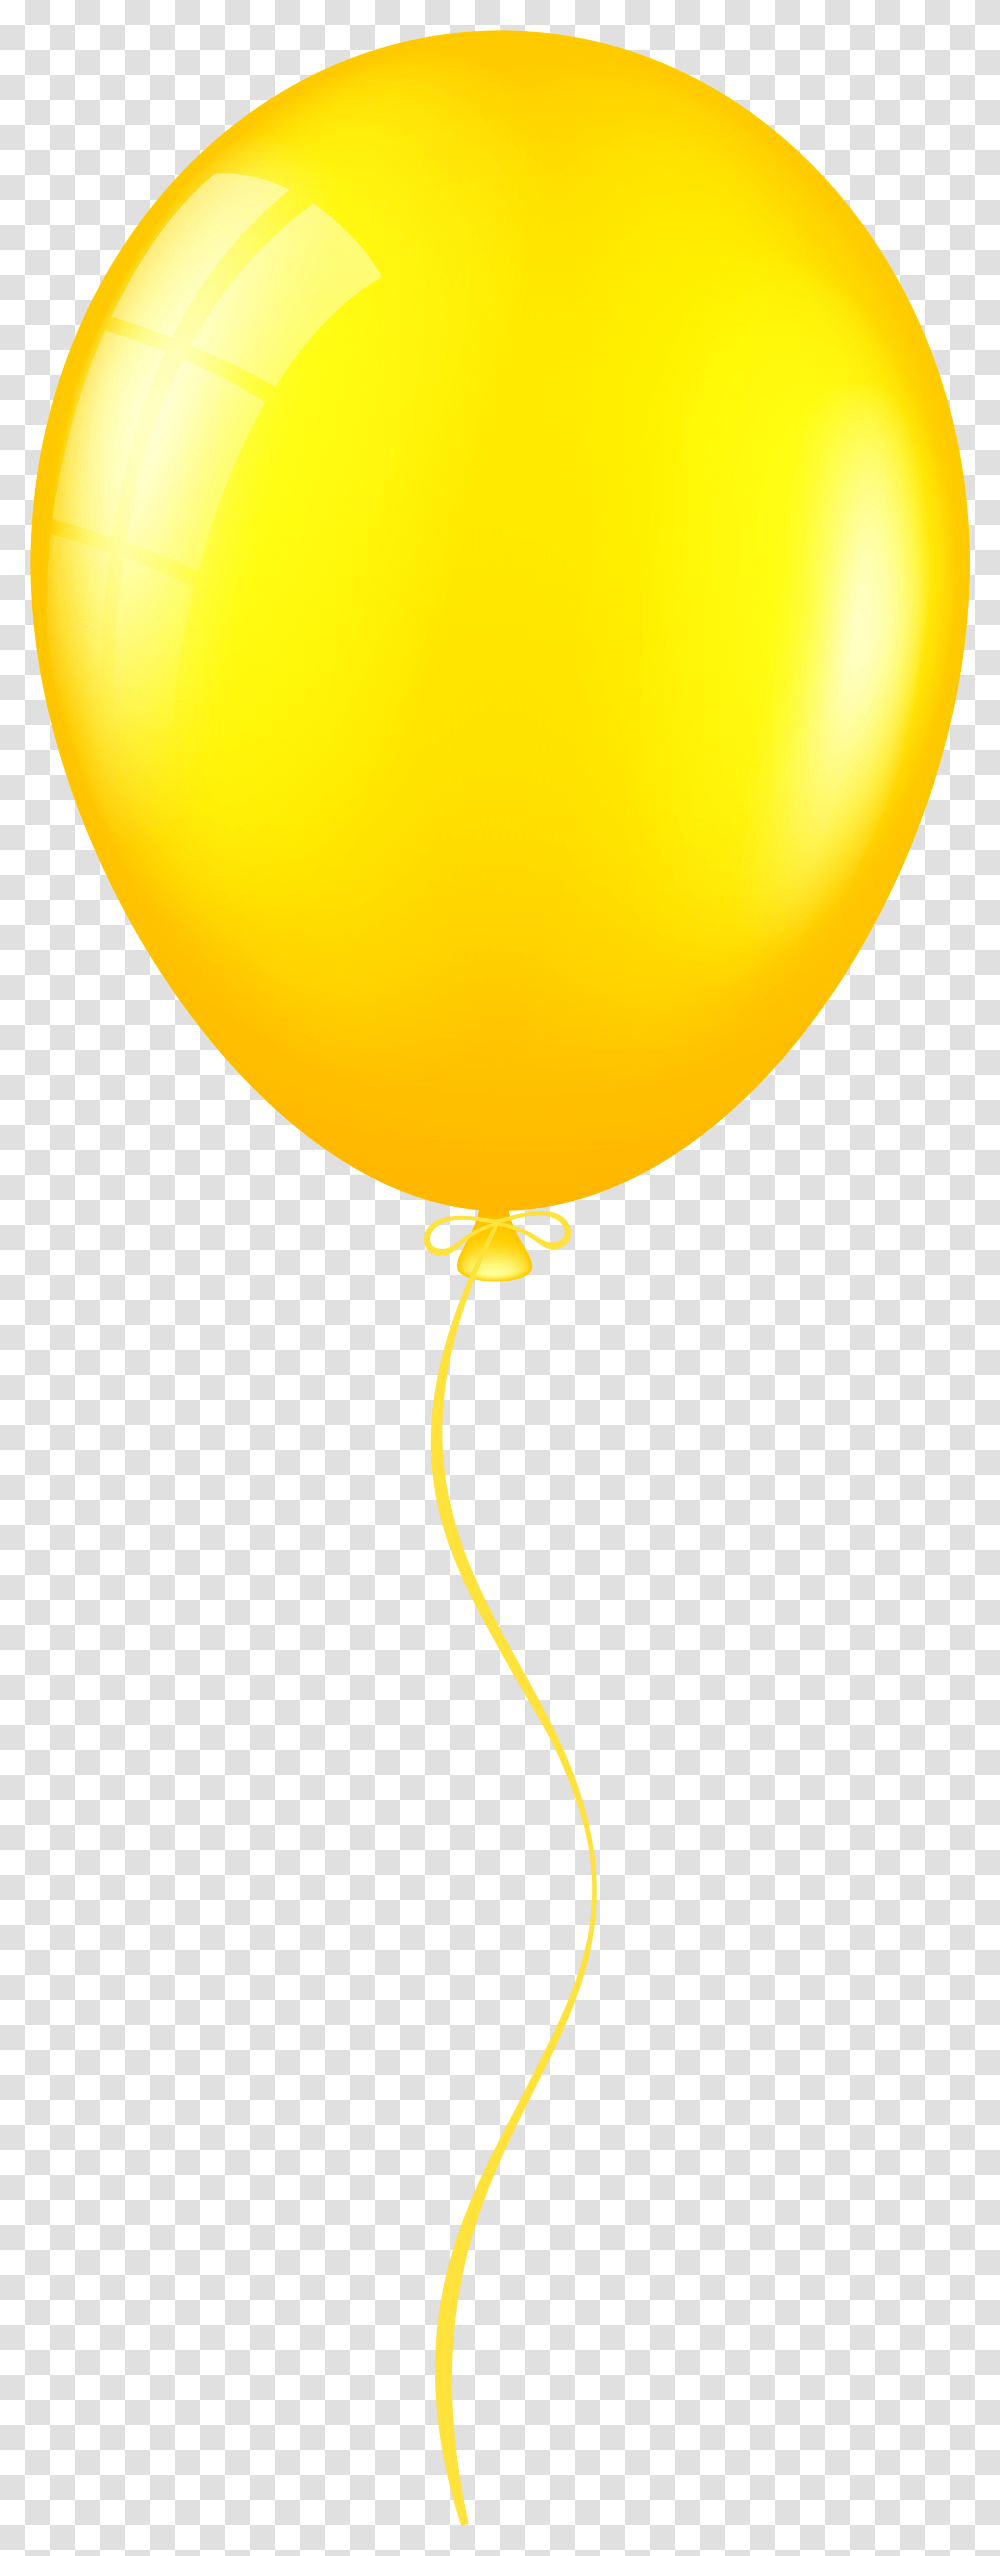 Library Of Black And Orange Balloons Picture Free Birthday Balloon Transparent Png